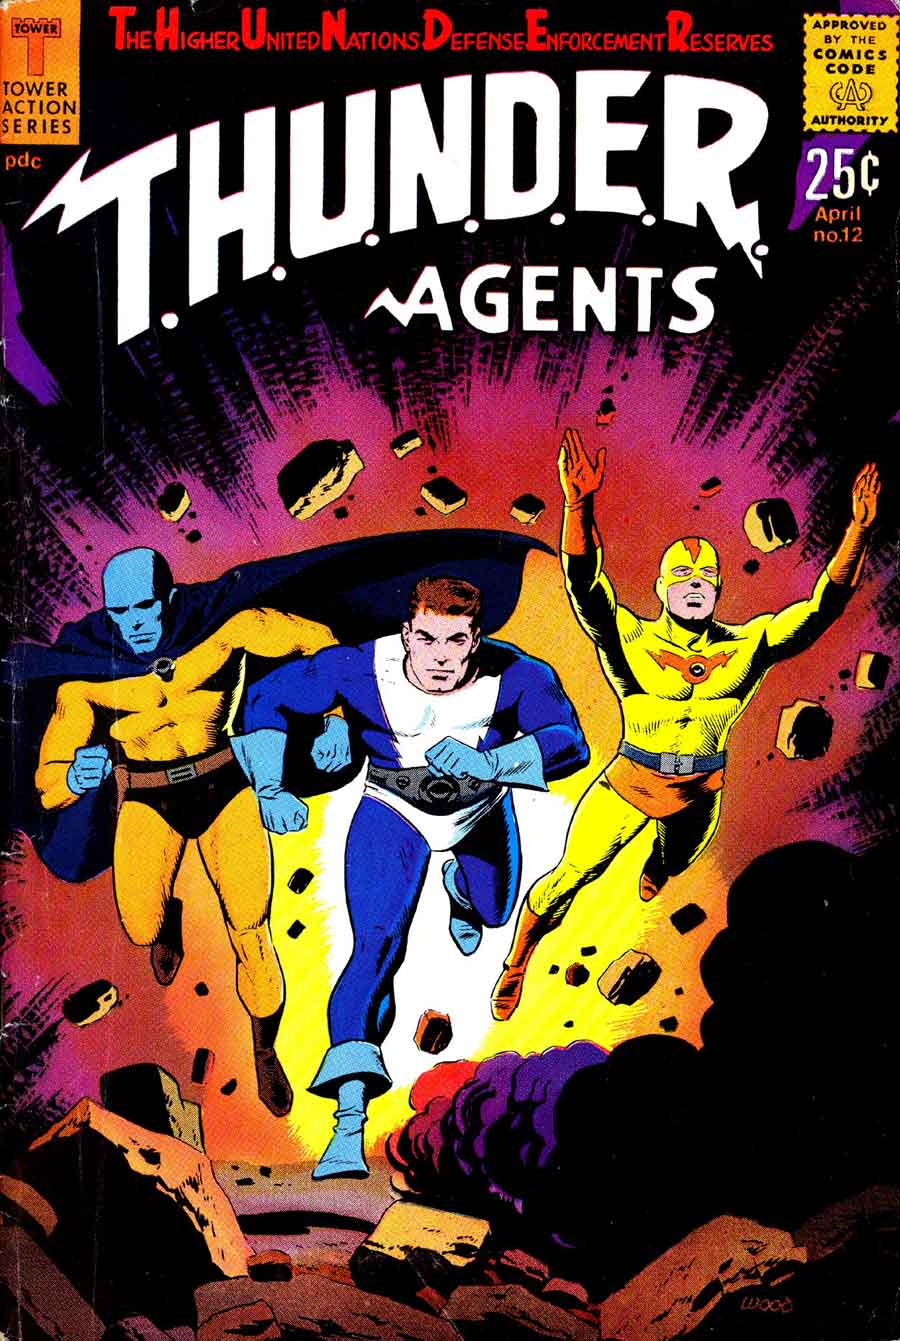 Thunder Agents v1 #12 tower silver age 1960s comic book cover art by Wally Wood